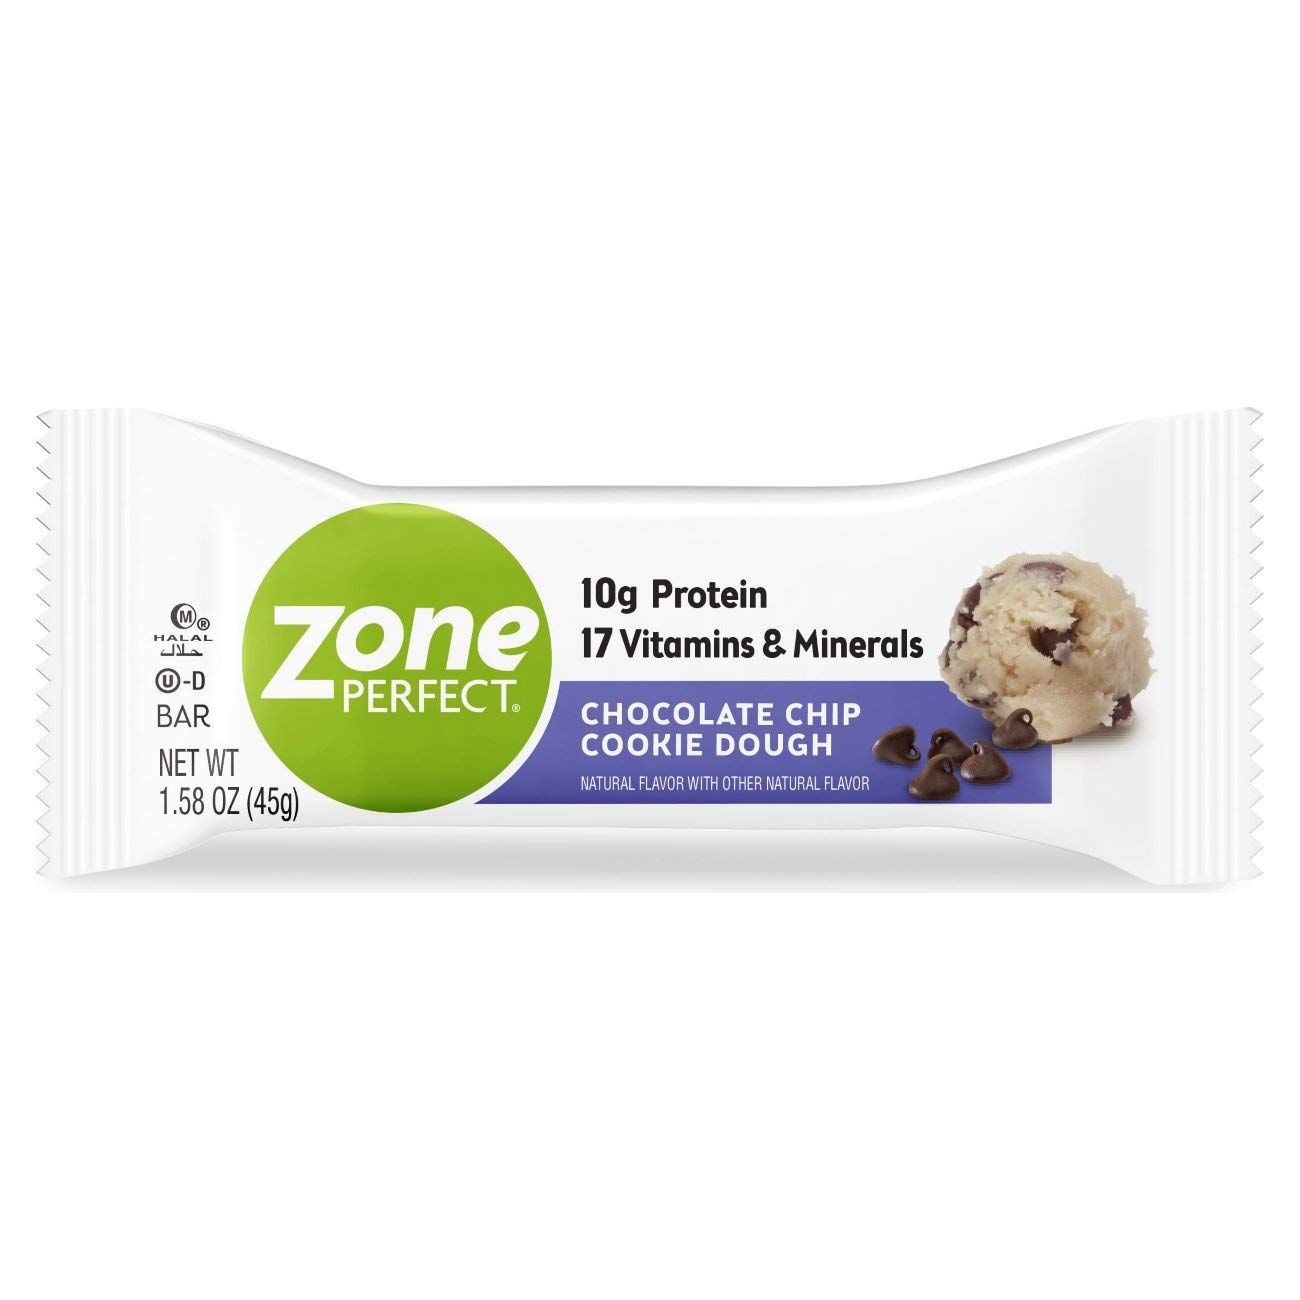 ZonePerfect Protein Bars, 17 Vitamins & Minerals, 10g Protein, Nutritious Snack Bar, Chocolate Chip  | Amazon (US)